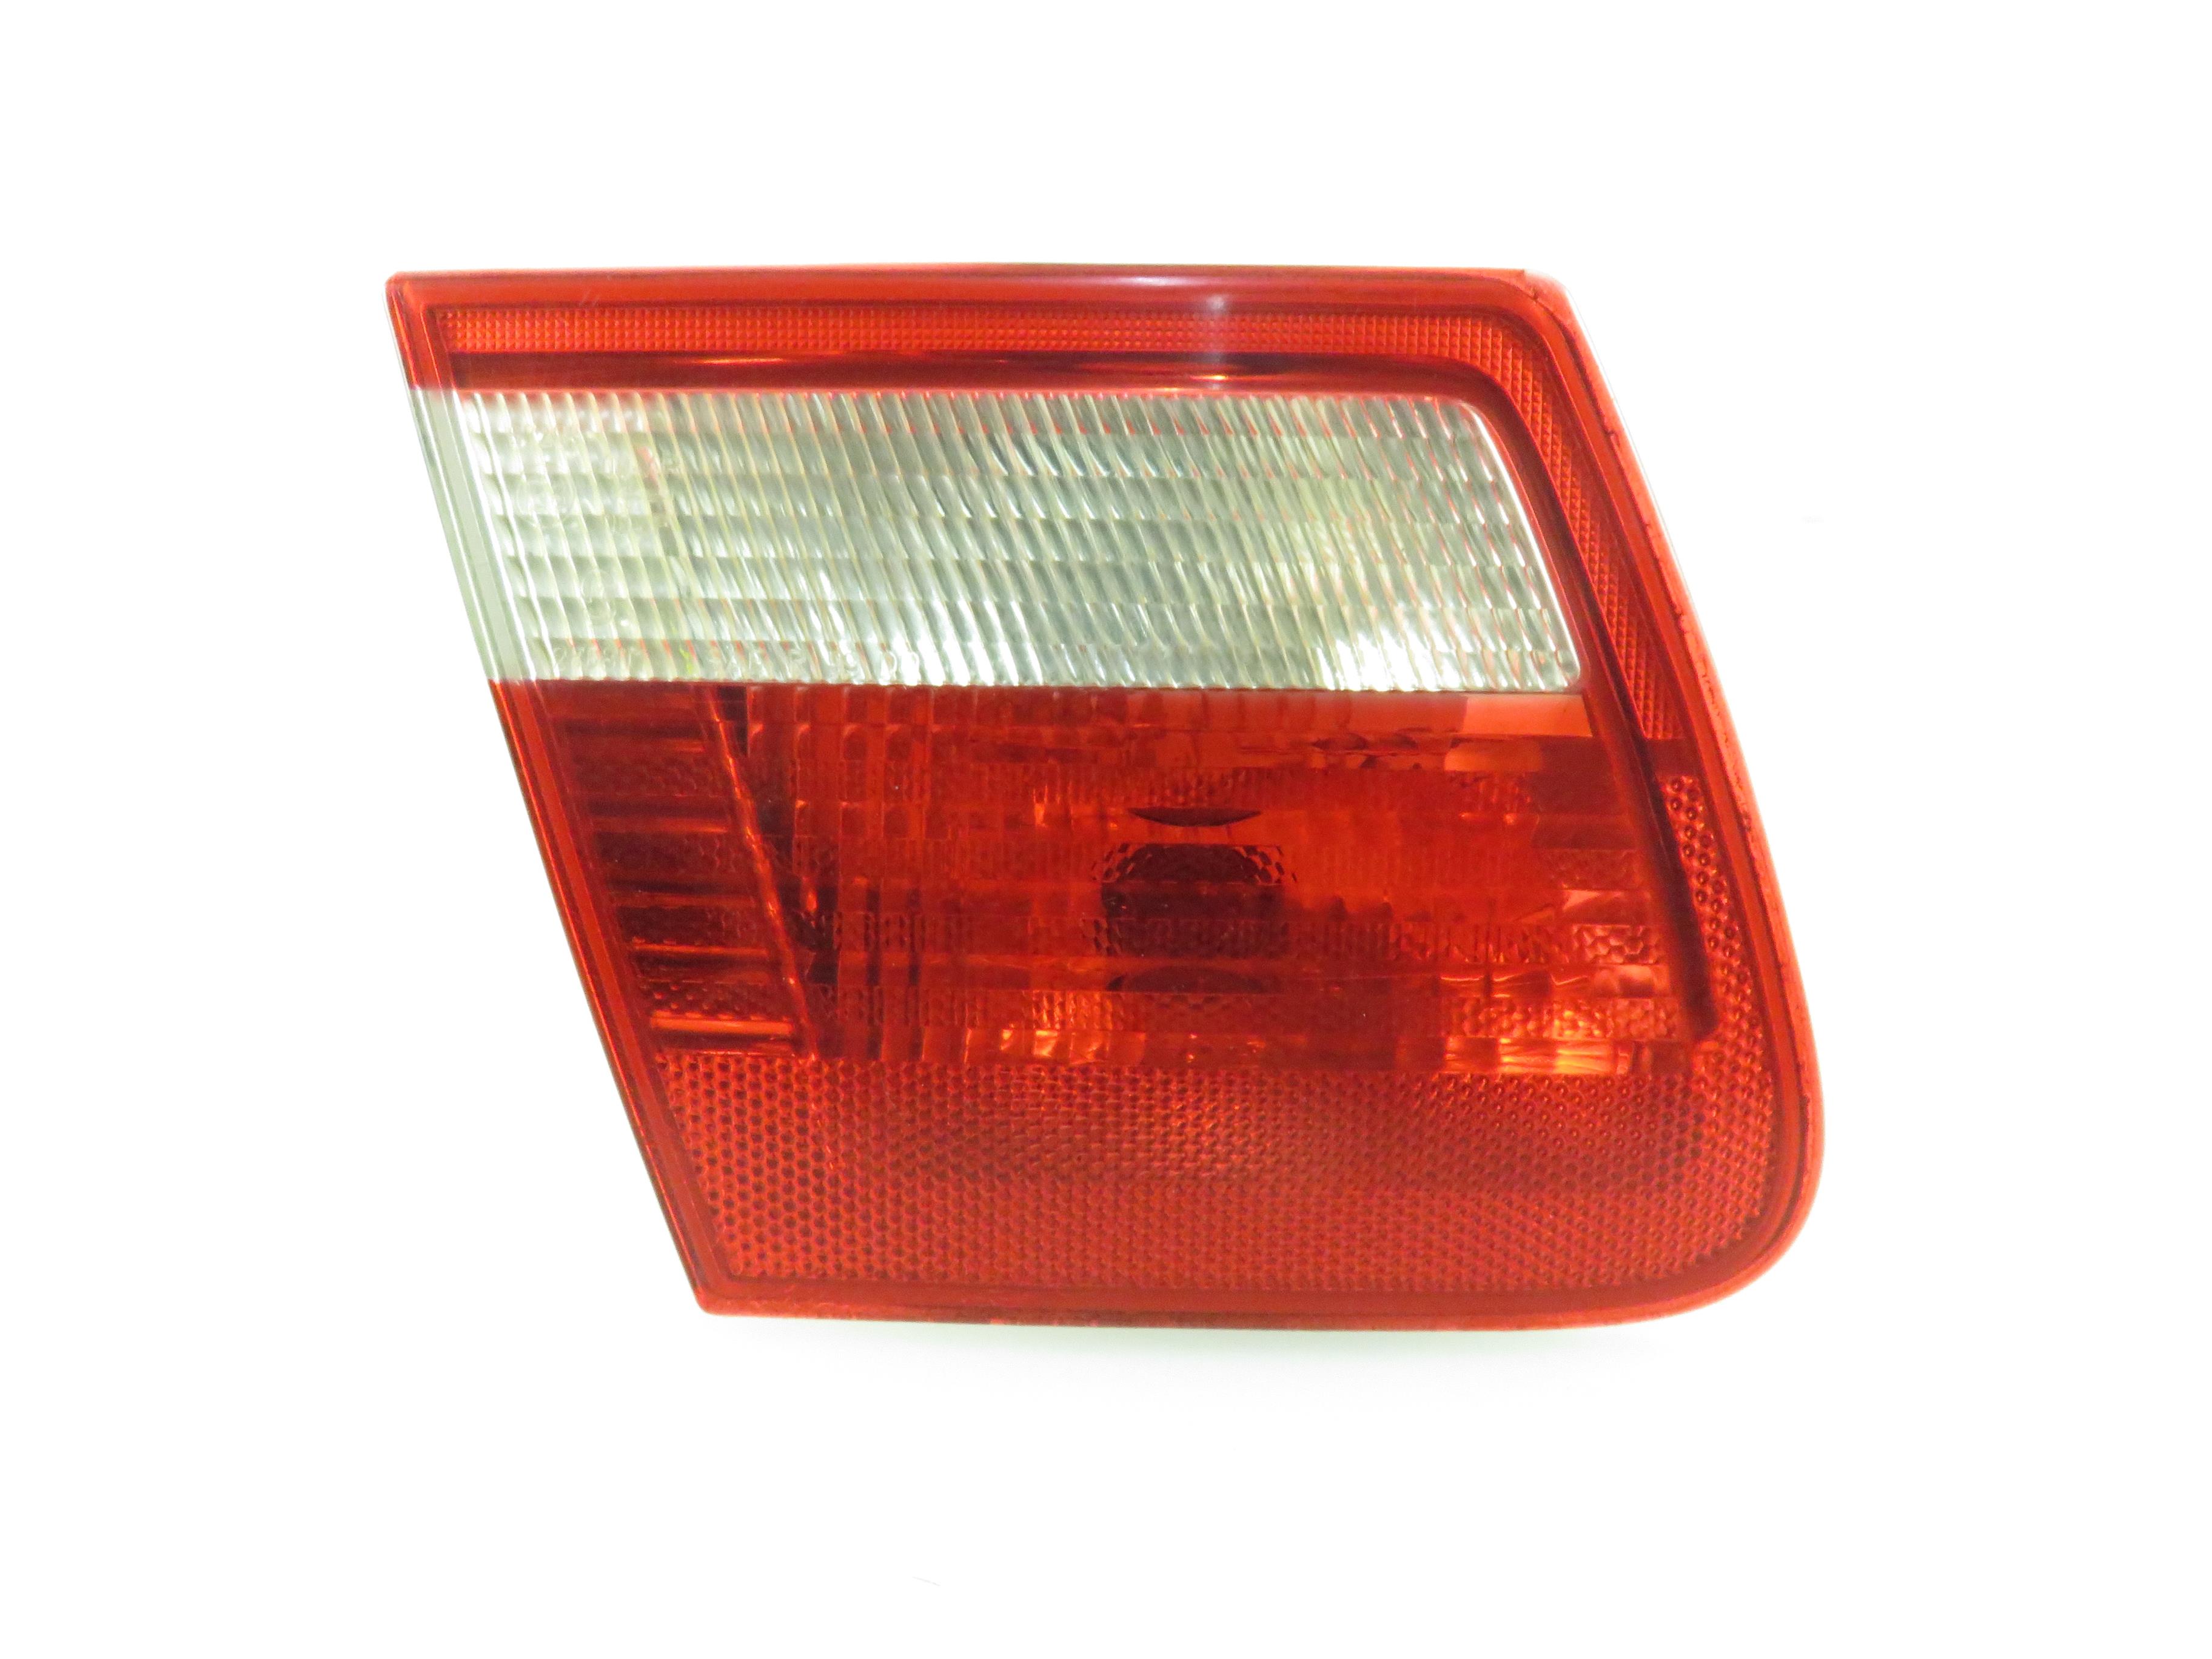 BMW 3 Series E46 (1997-2006) Rear Left Taillight 63218368759 21857143